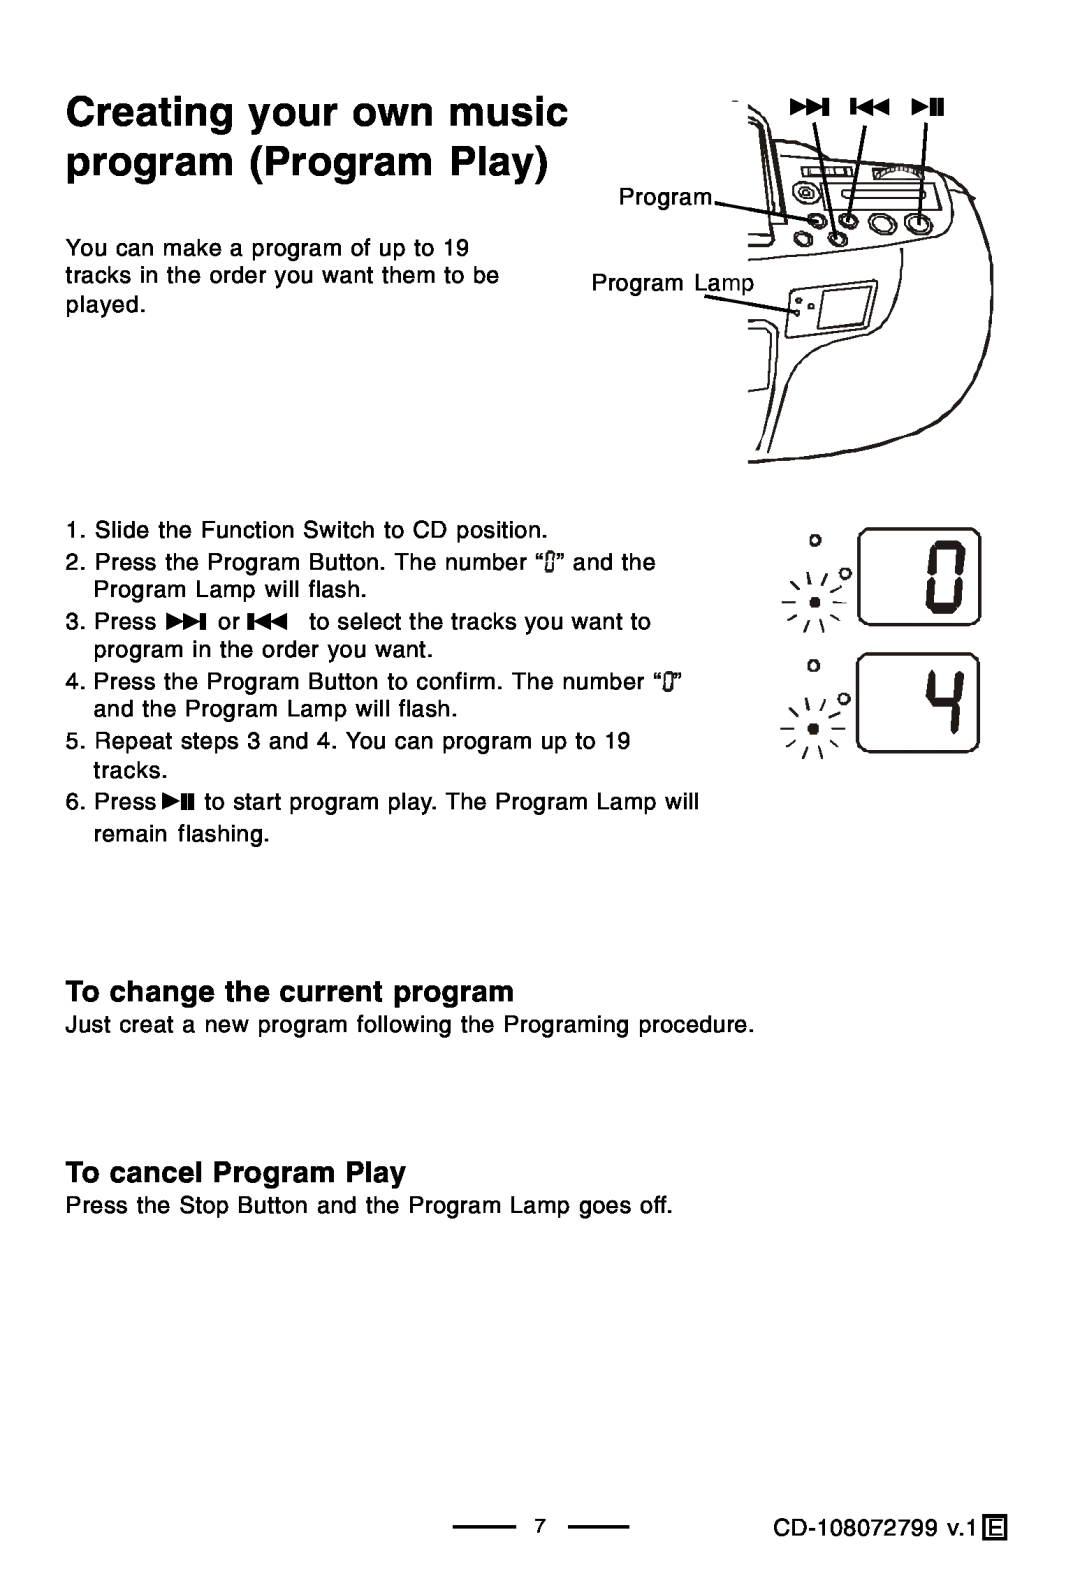 Lenoxx Electronics CD-108 Creating your own music program Program Play, To change the current program 